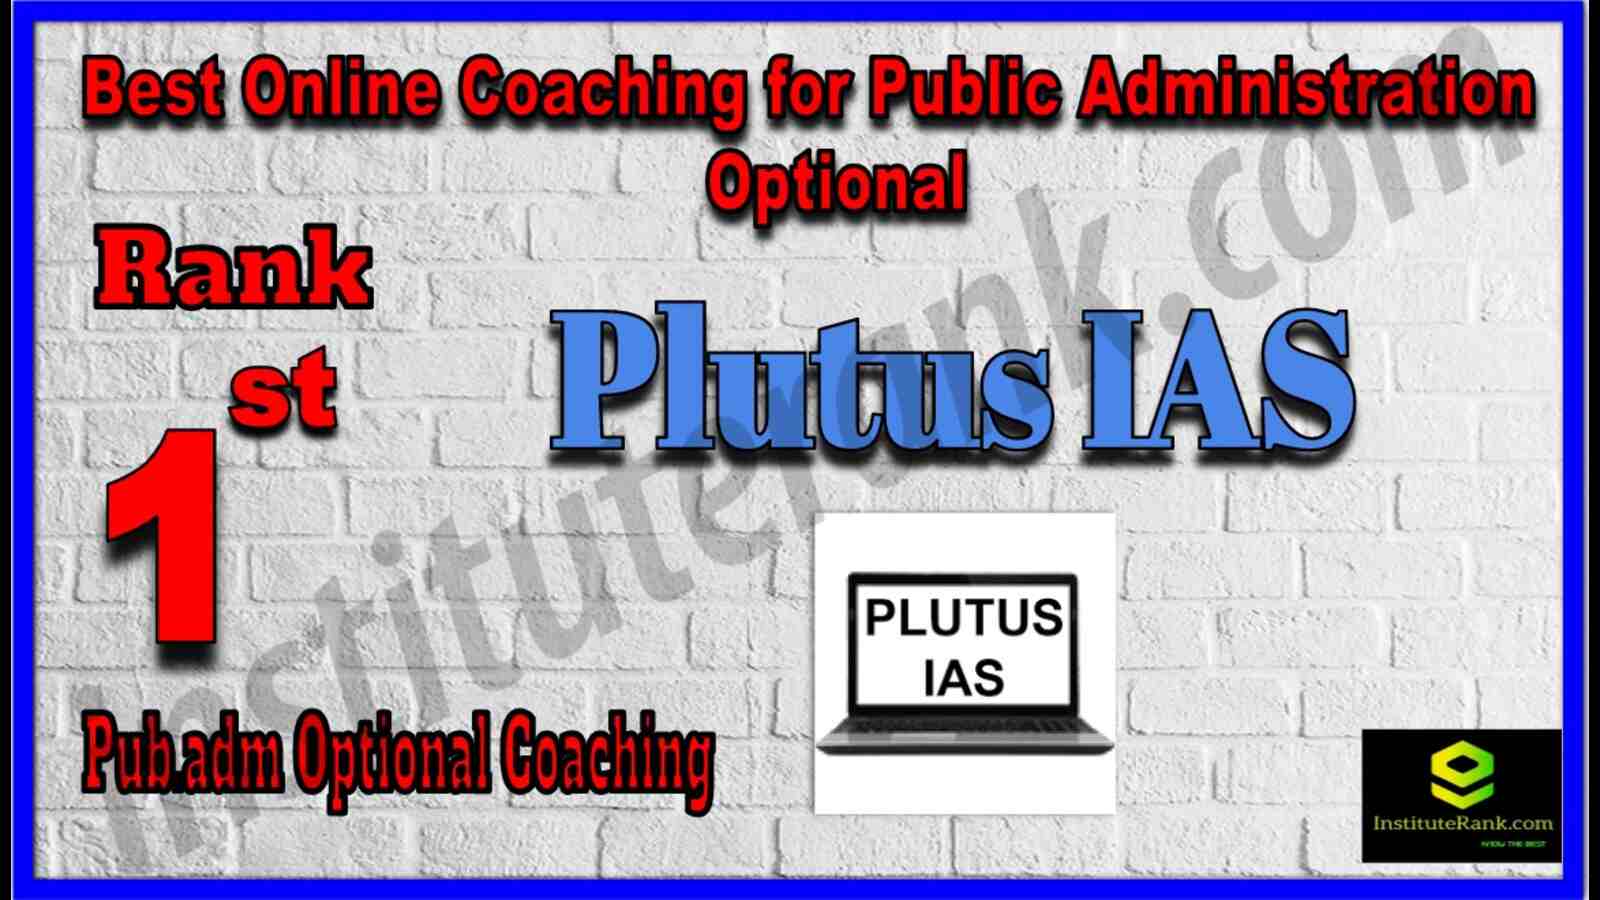 Rank 1 Best Online Coaching for Public Administration Optional